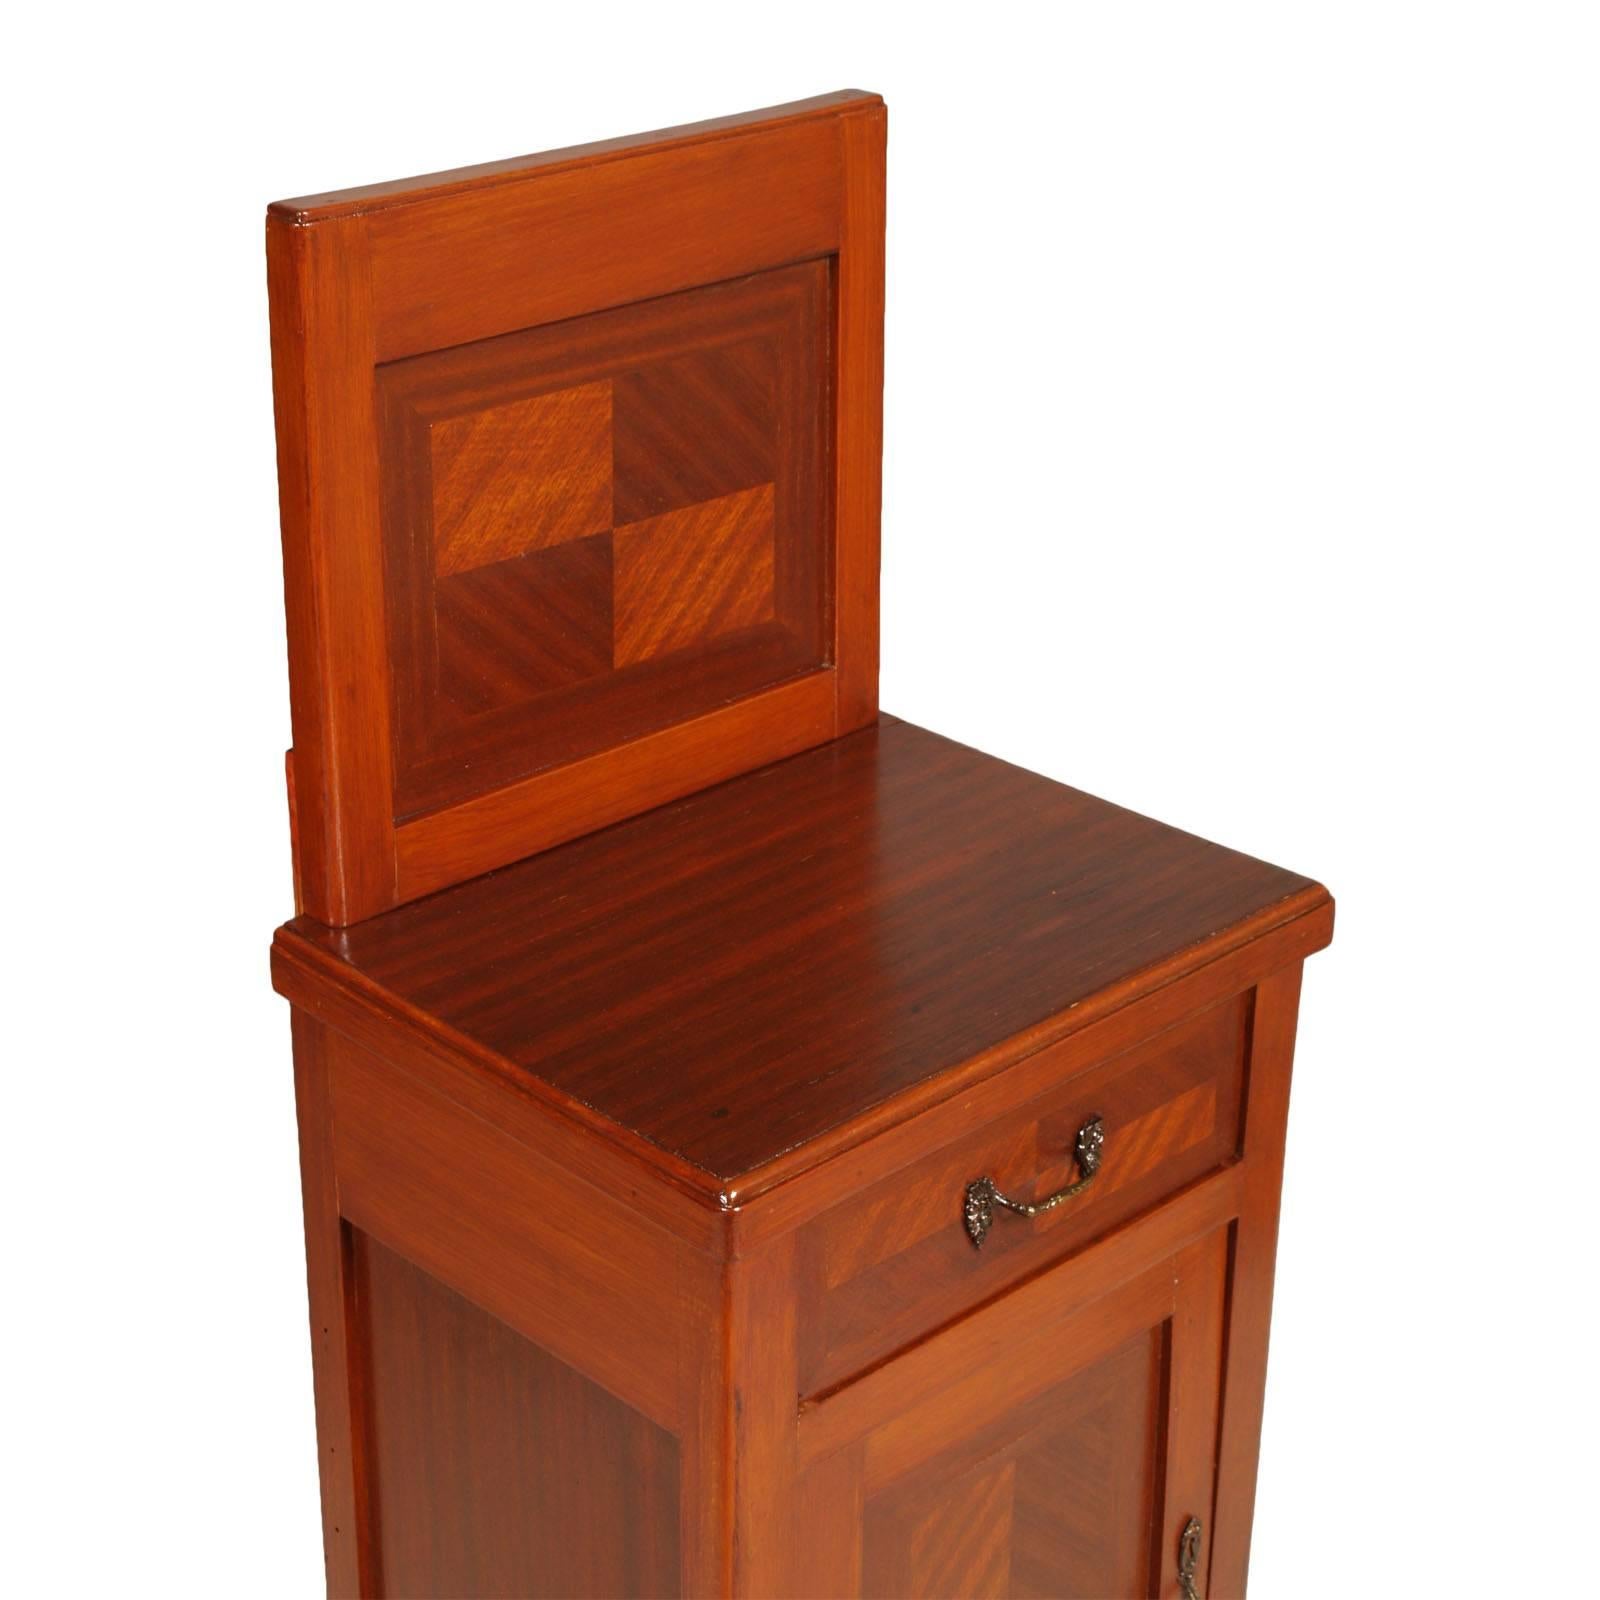 Early 20th century Italian Art Nouveau nightstand in cherrywood and mahogany inlaid, restored and polished to wax
Measures cm: H 81+34, W 40, D 32.